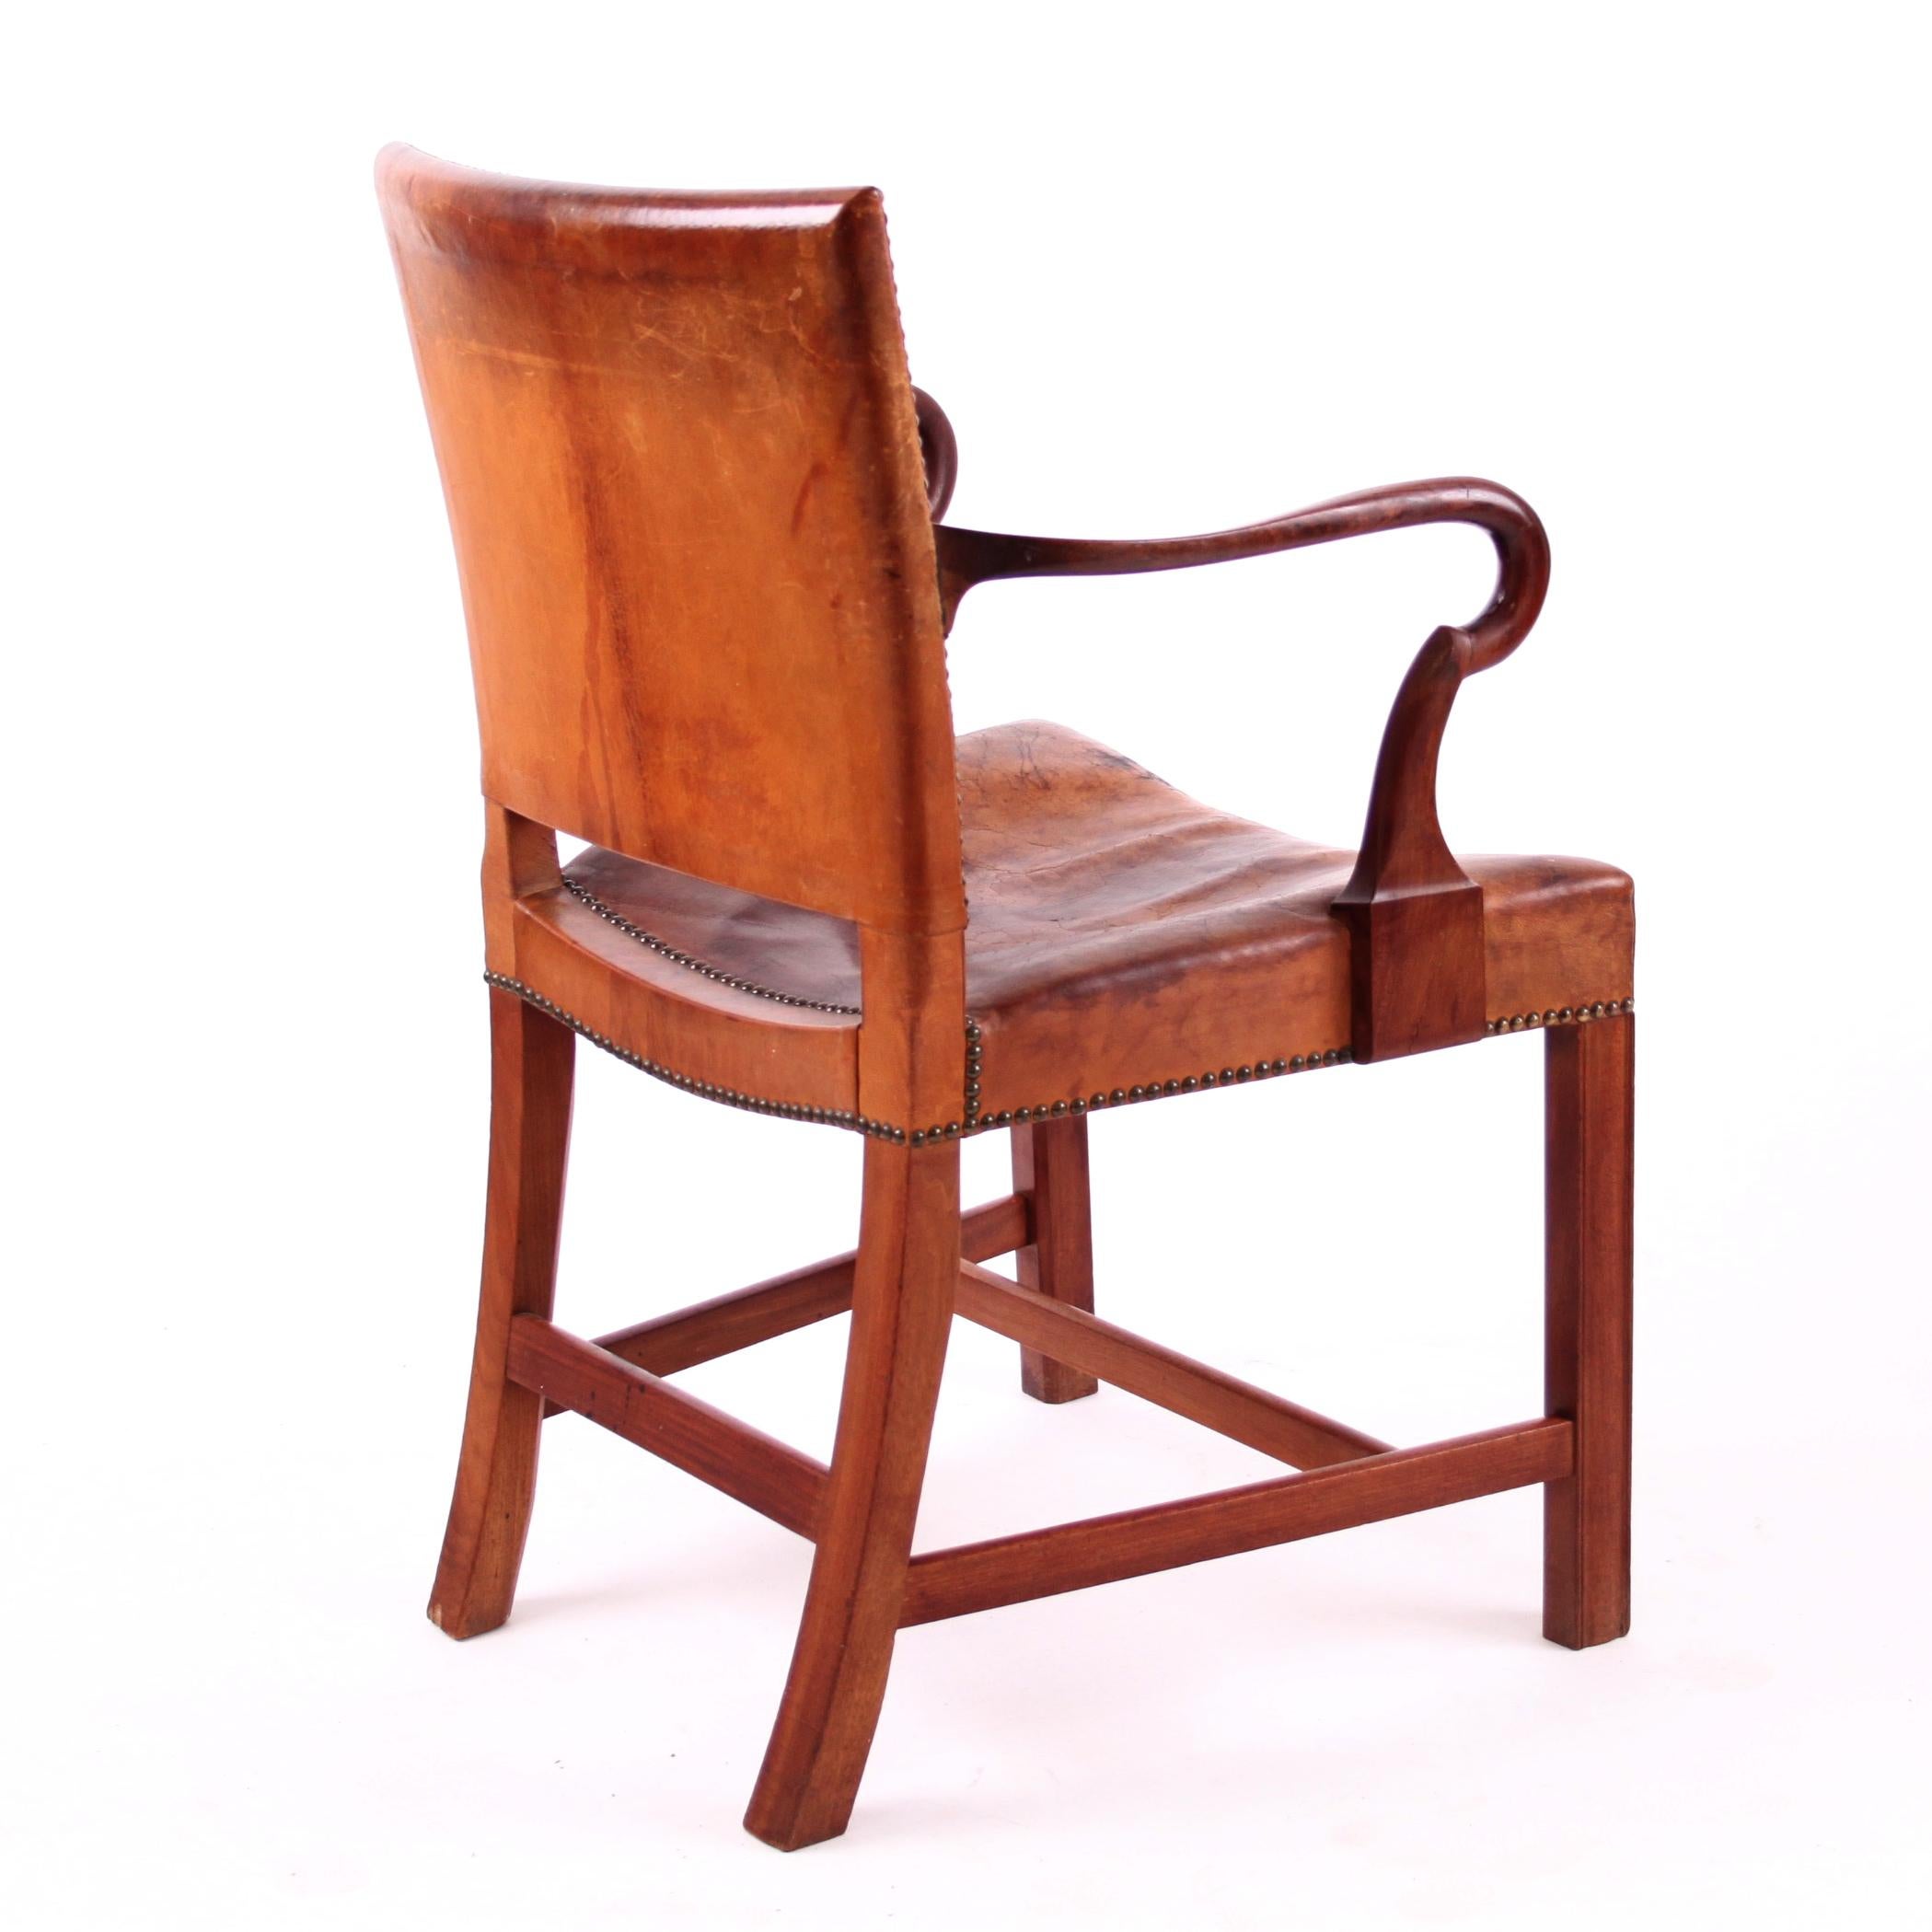 Oiled Kaare Klint and Ole Wanscher, Rare Armchair in Niger Leather and Mahogany Frame